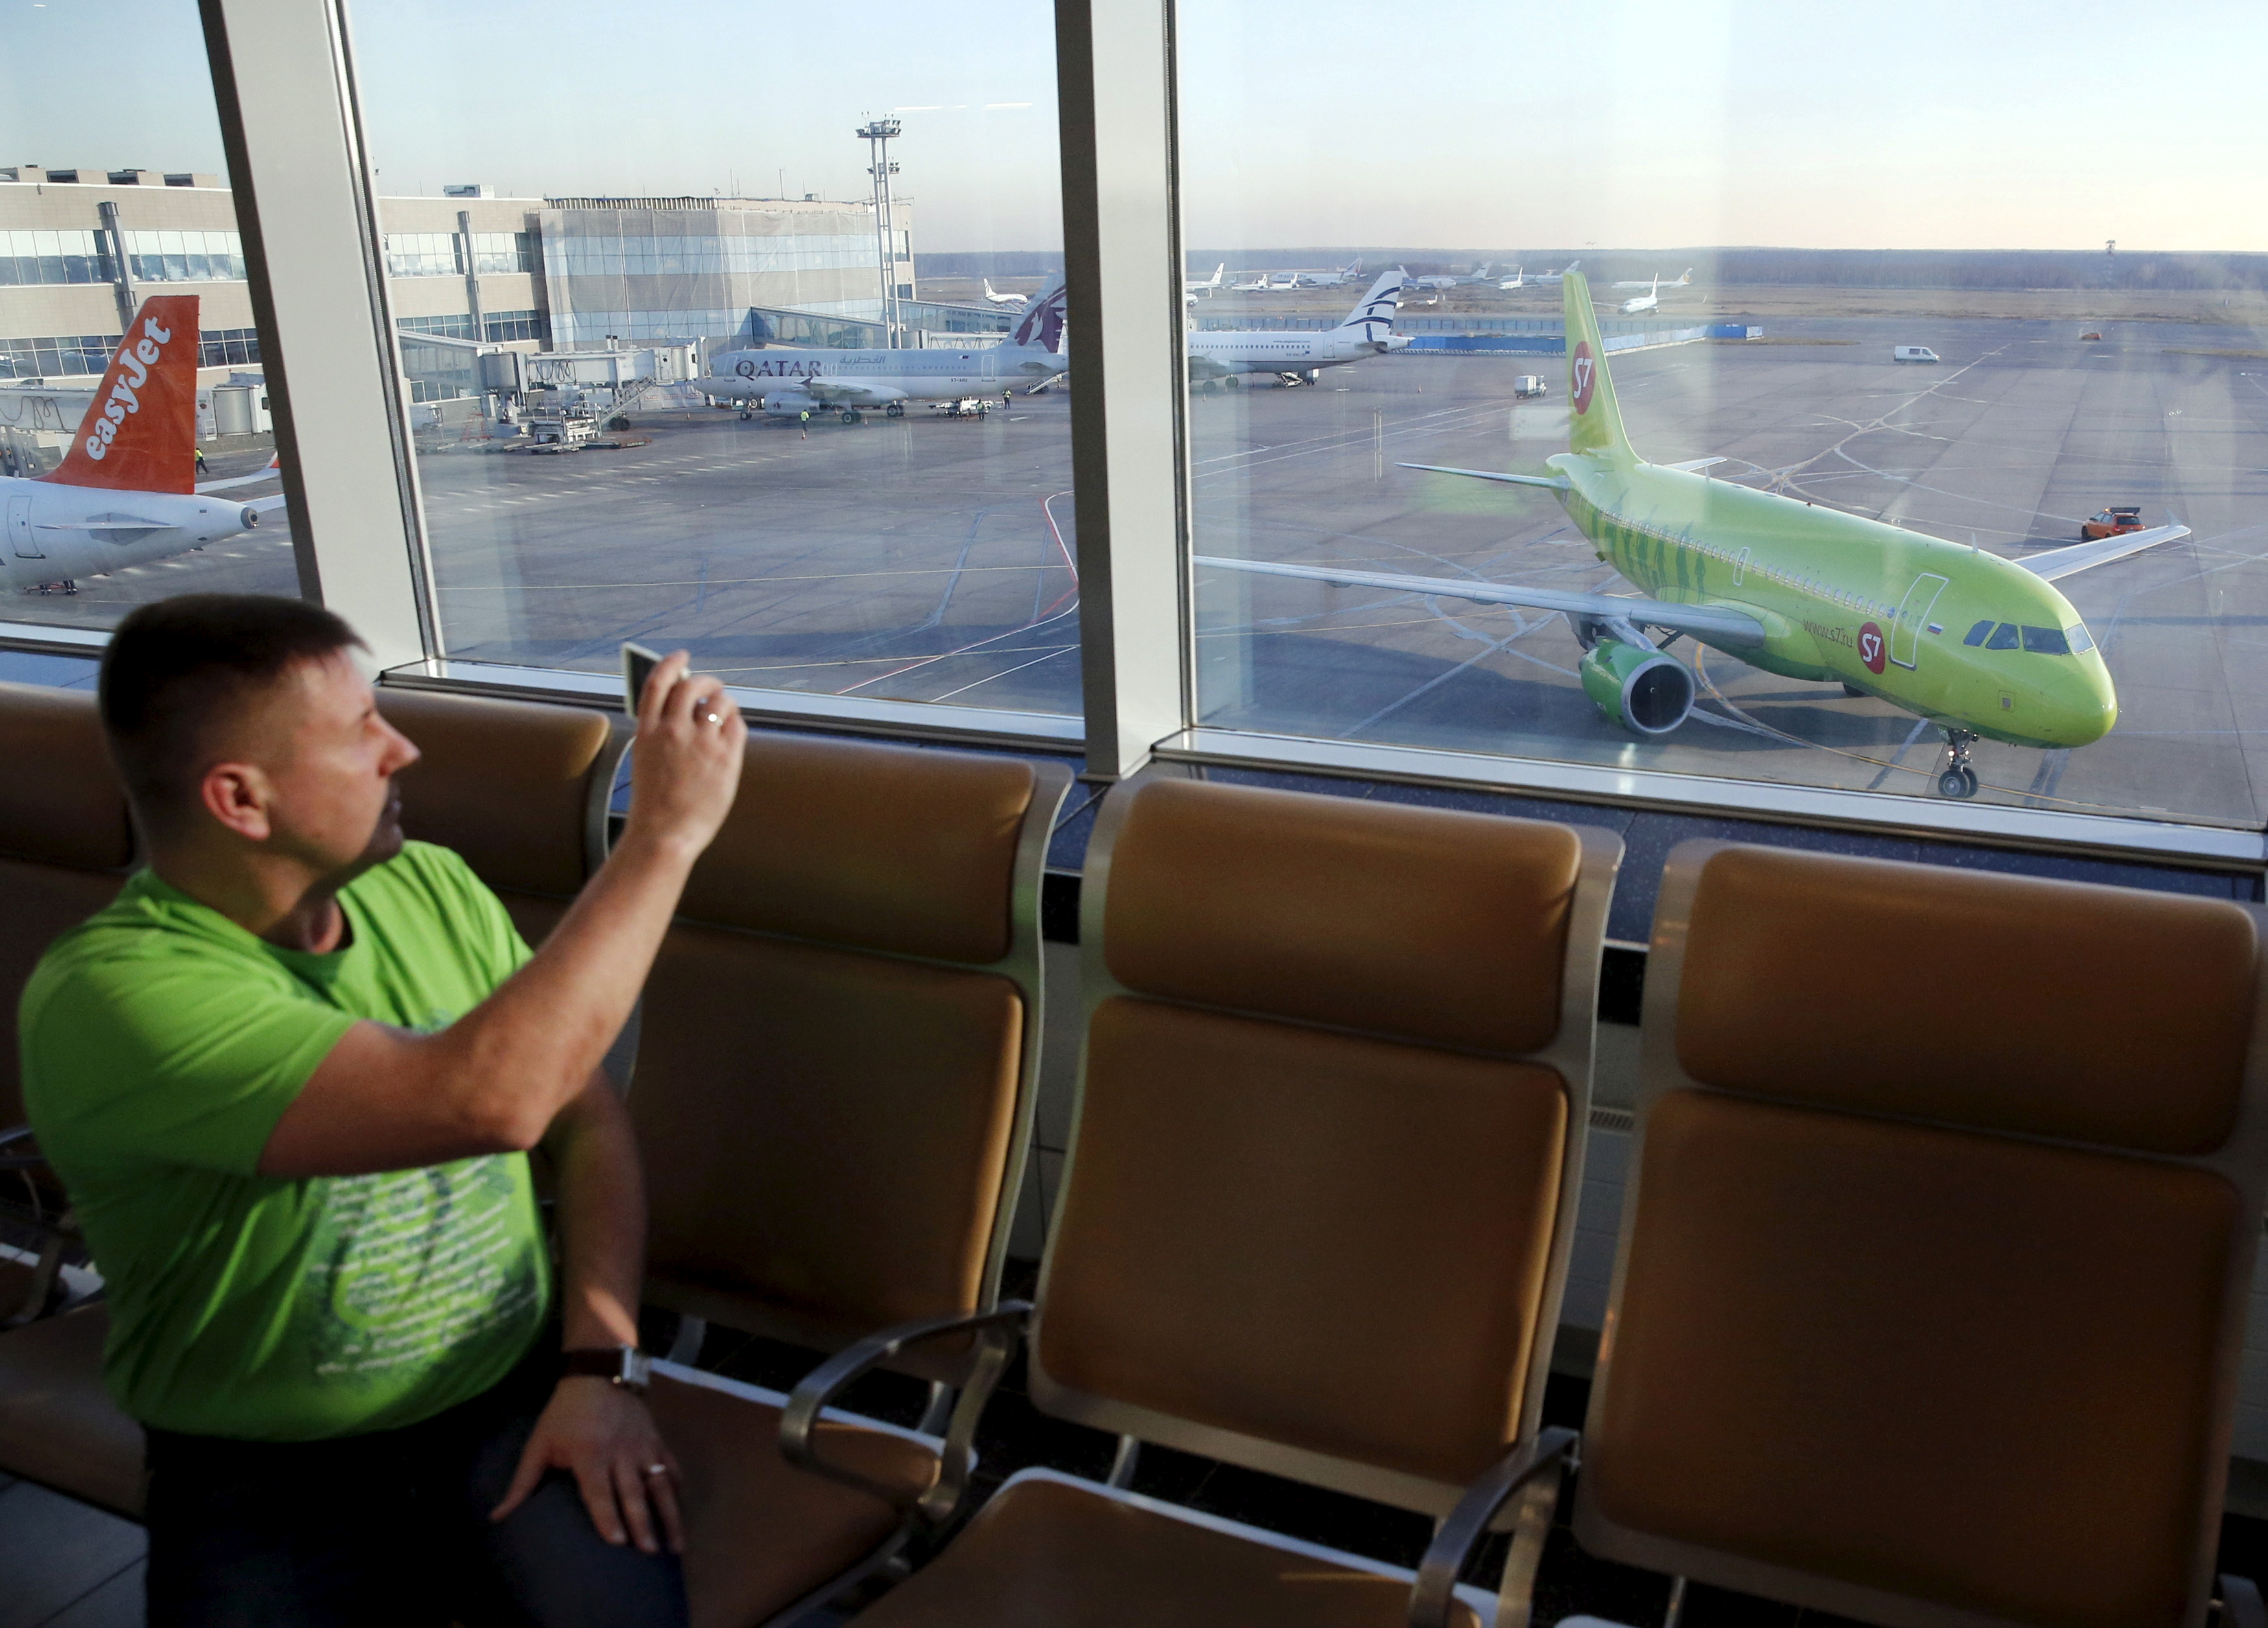 A man takes pictures, with a plane of S7 airlines seen in the background, at Domodedovo airport outside Moscow